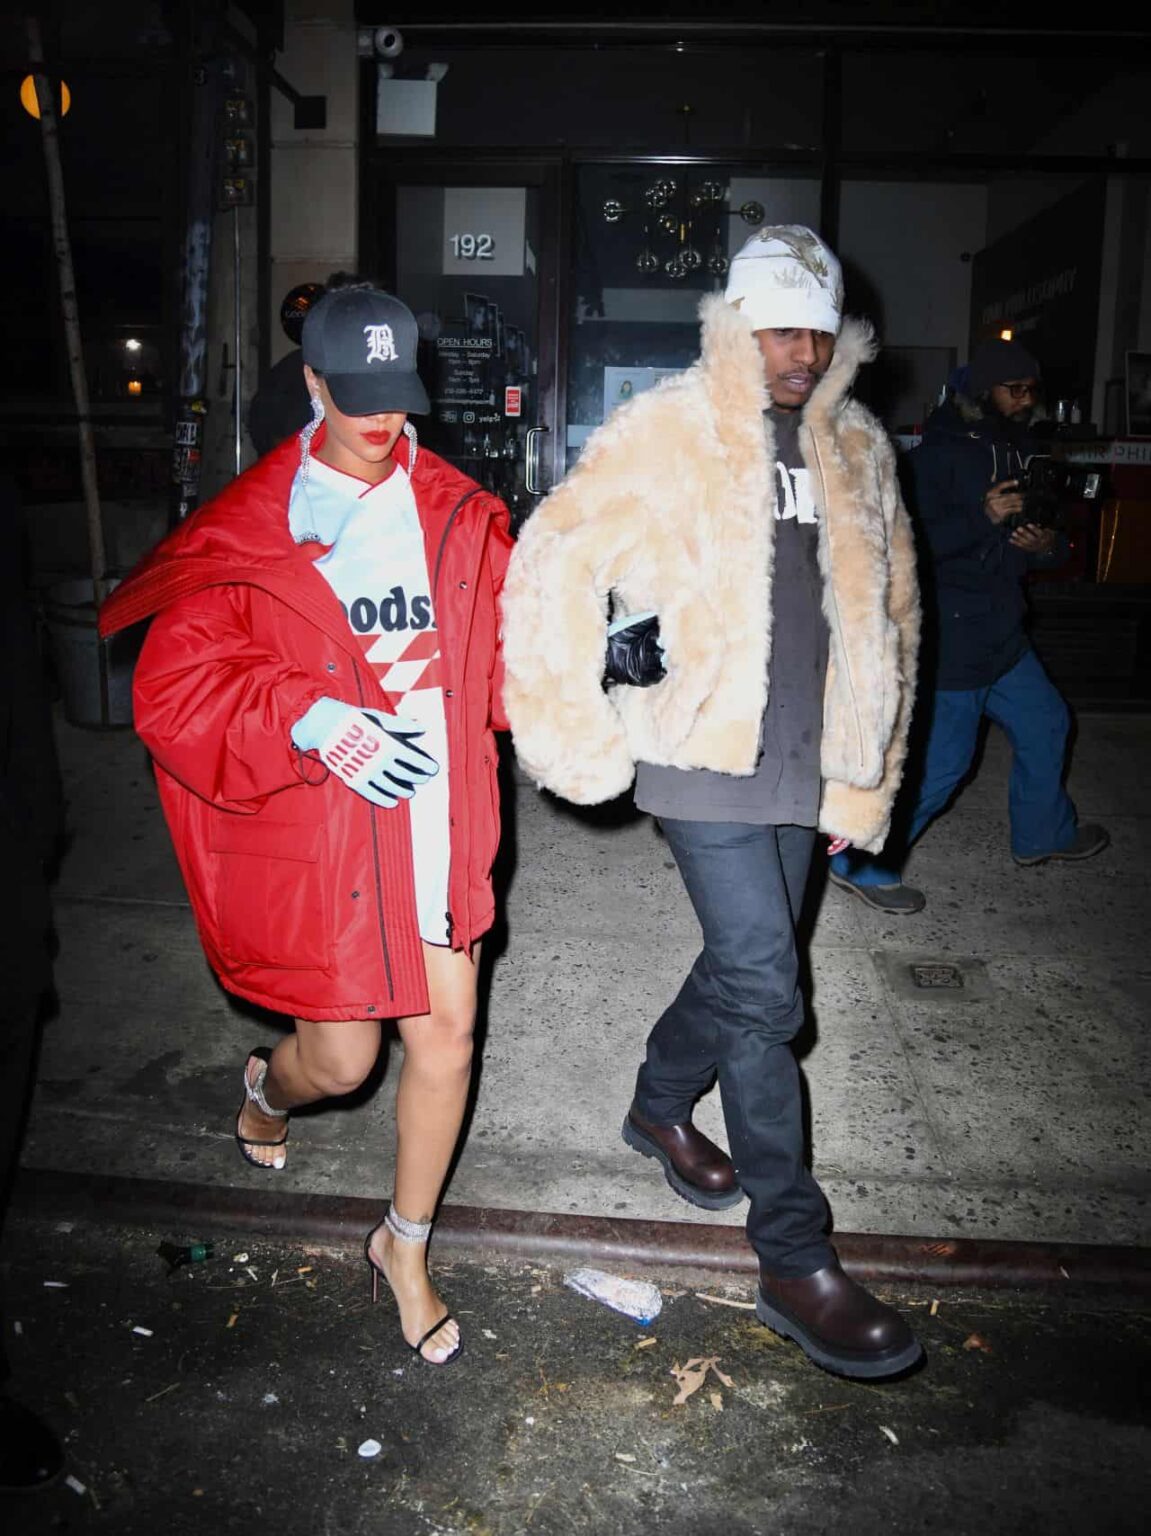 Rihanna and A$AP Rocky Held Hands as they Entered a Fav Restaurant in SoHo